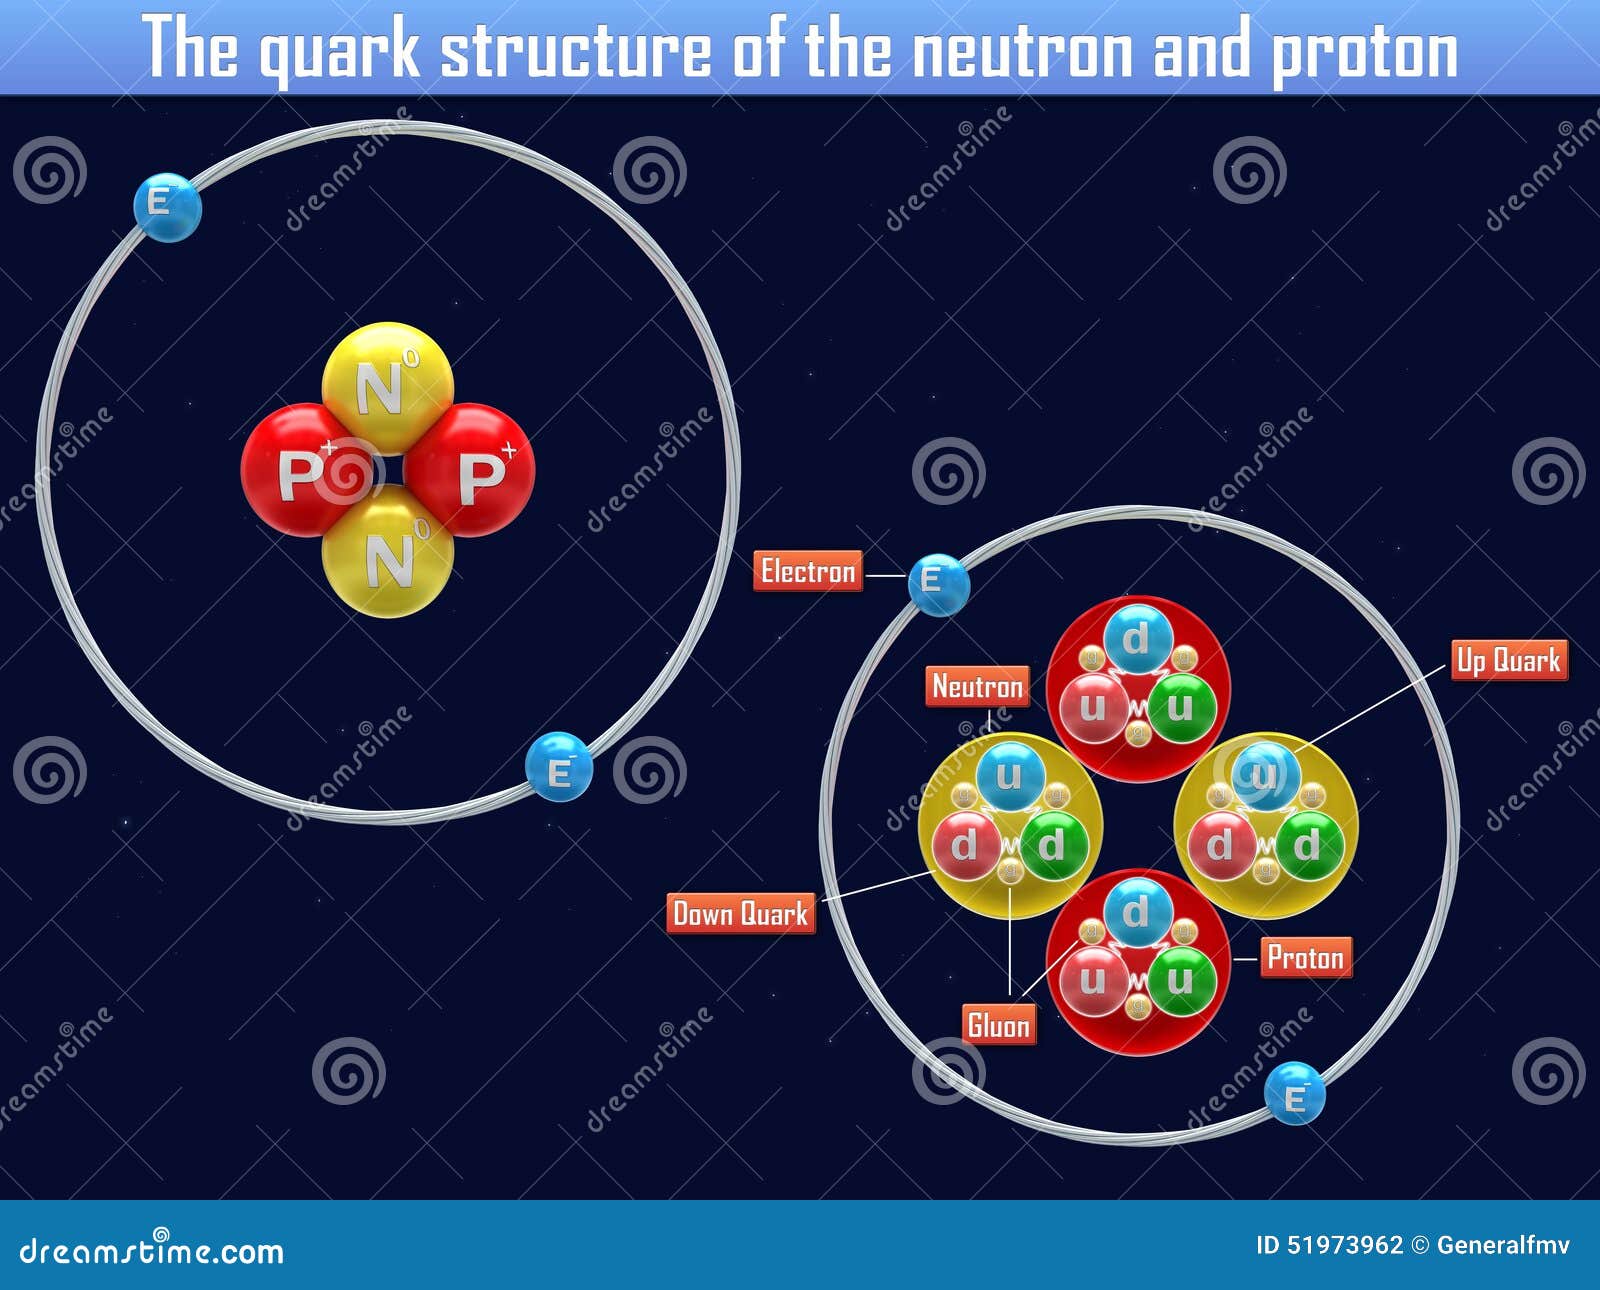 the quark structure of the neutron and proton